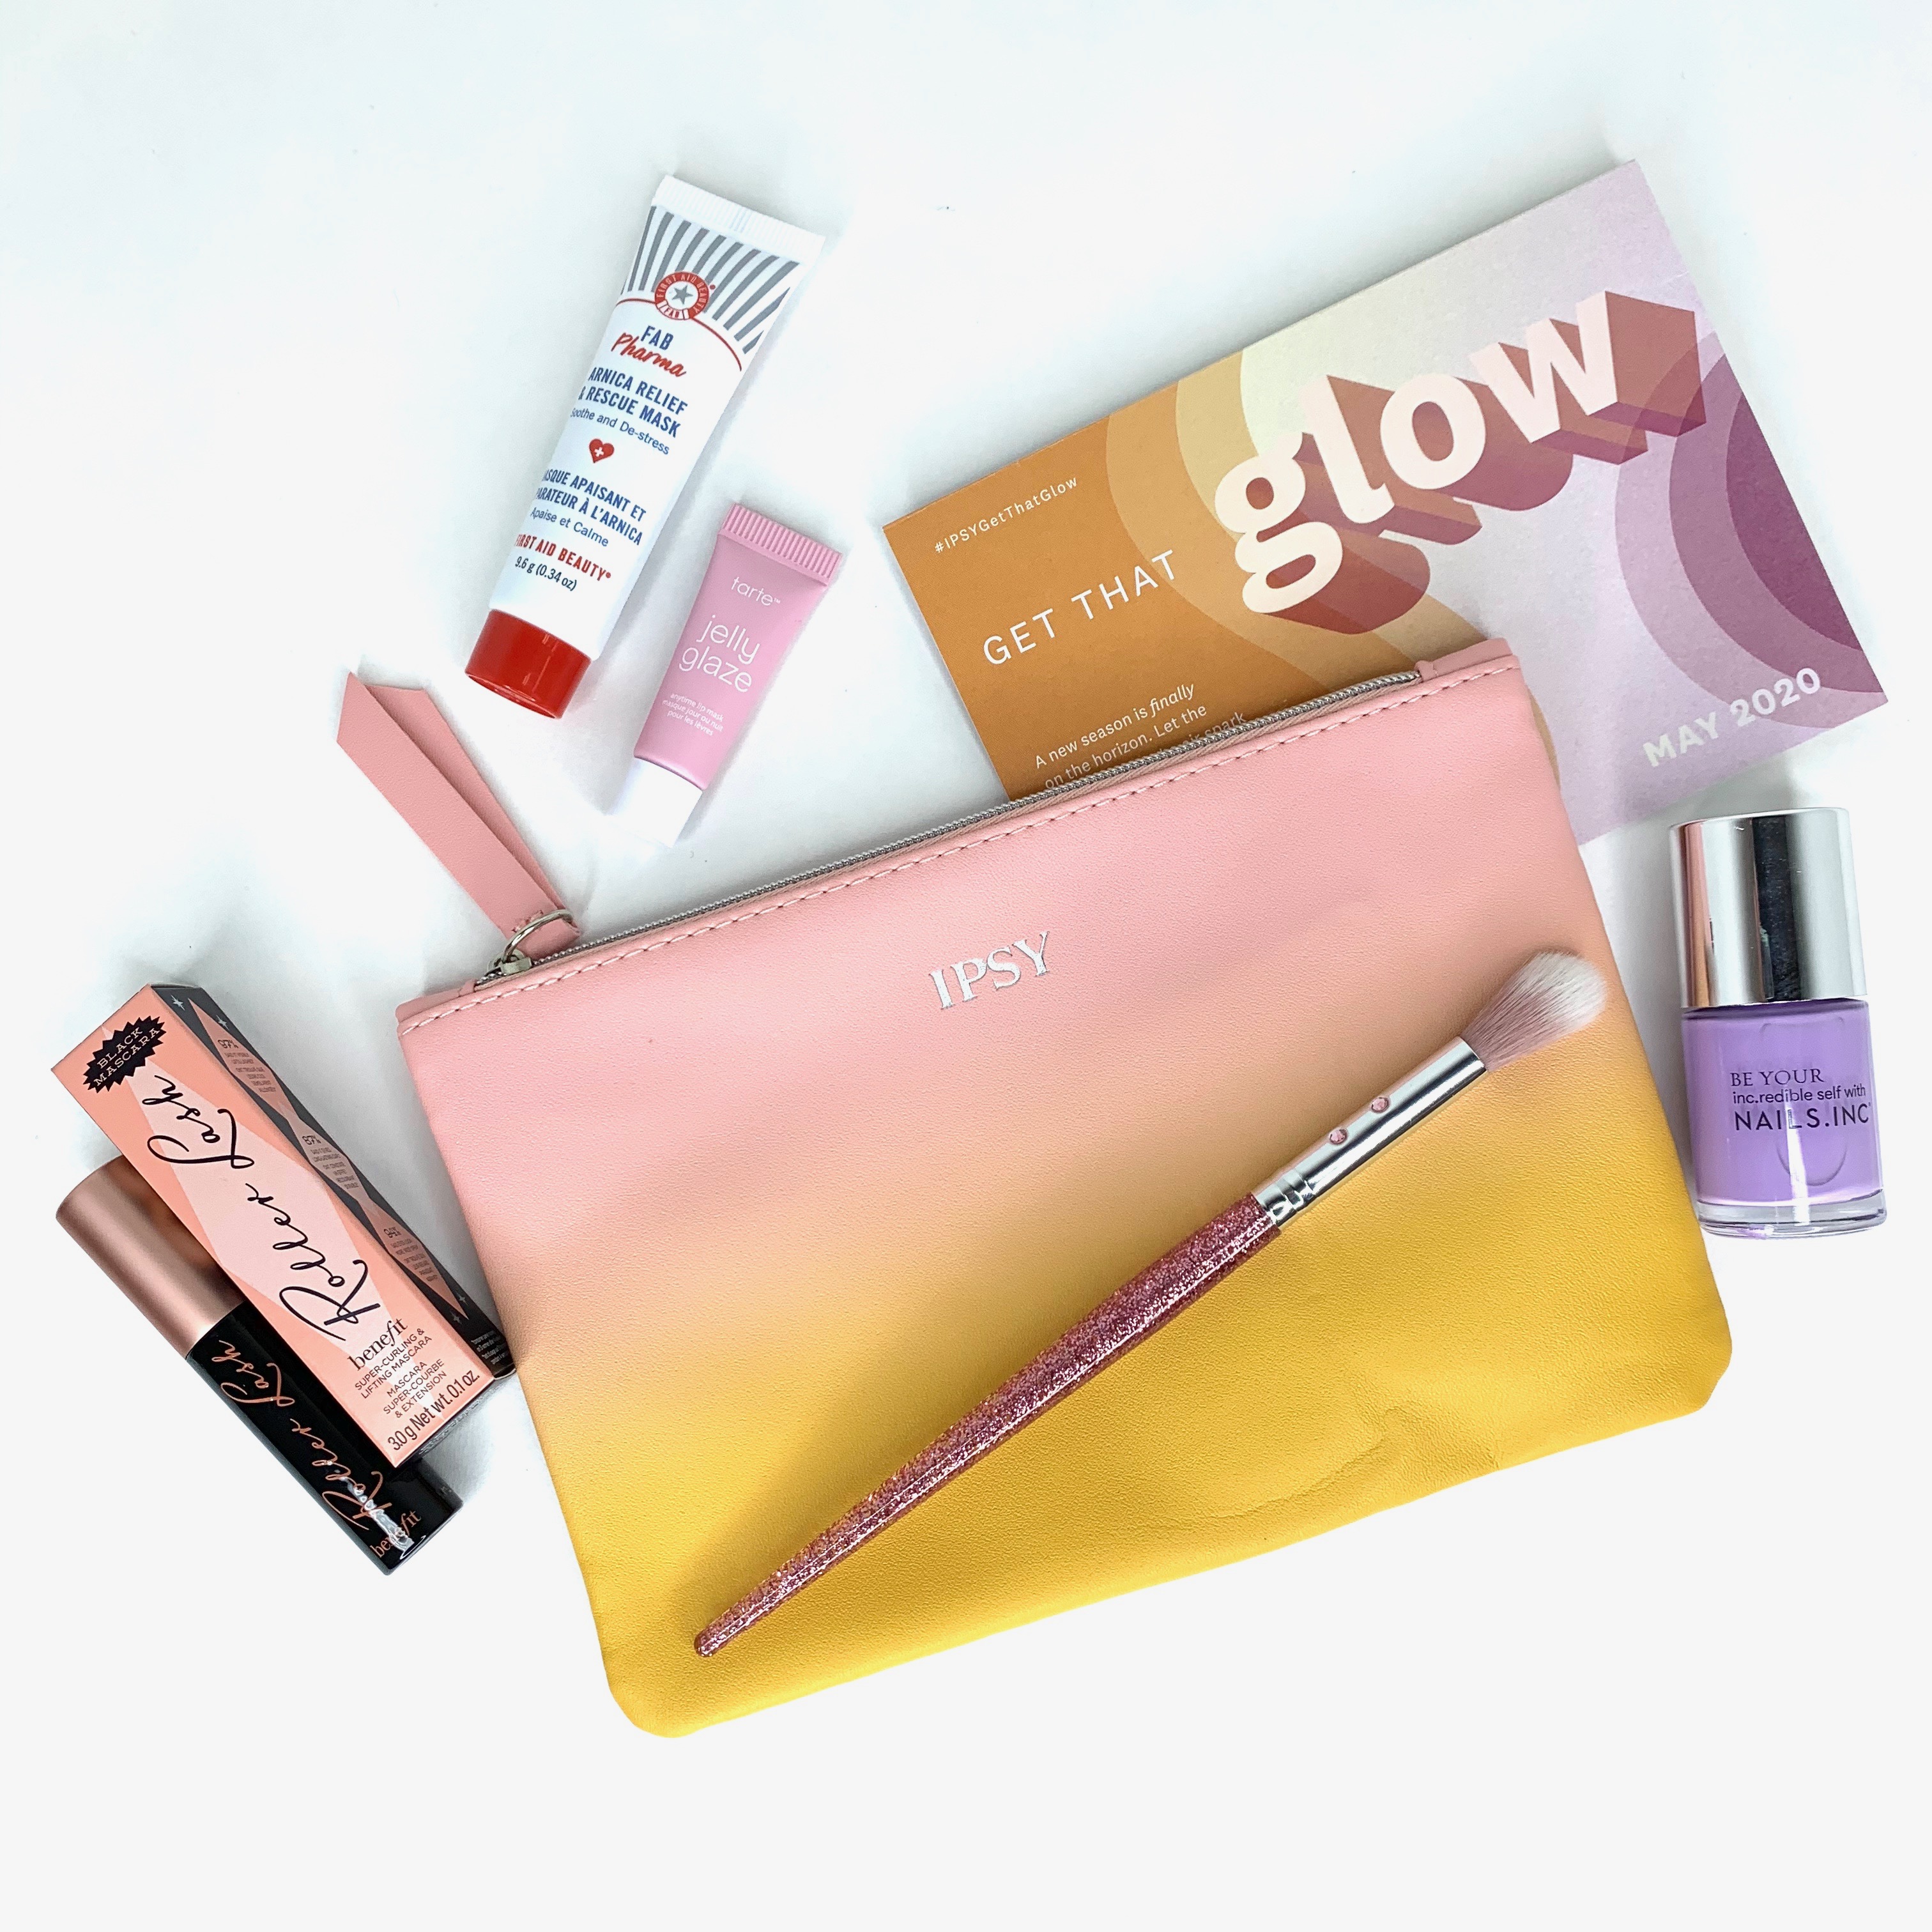 Full Contents for Ipsy May 2020